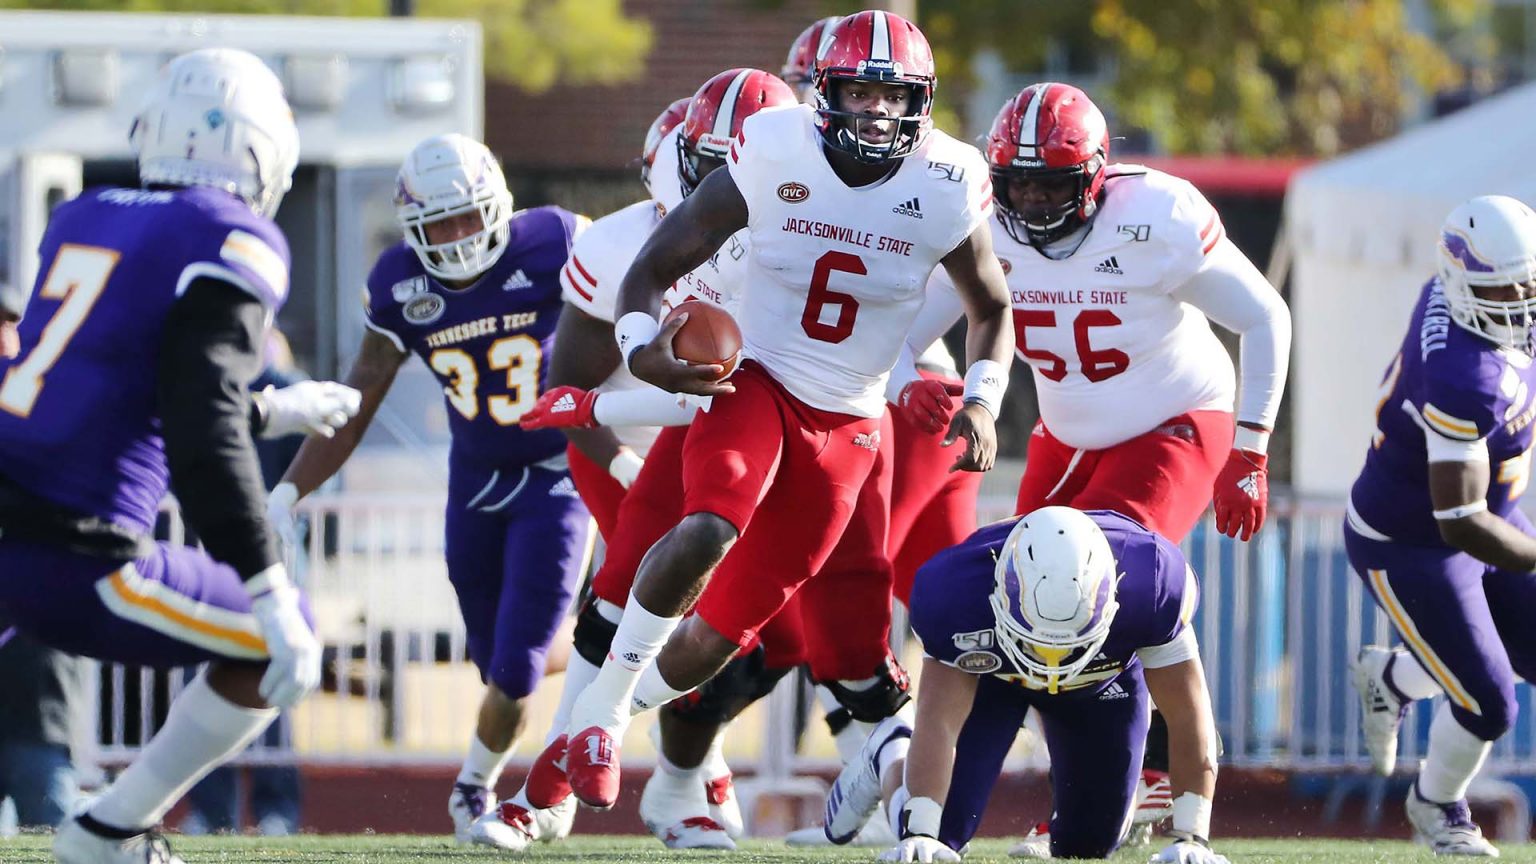 2021 Fcs Season Preview Jacksonville State The College Sports Journal 3403